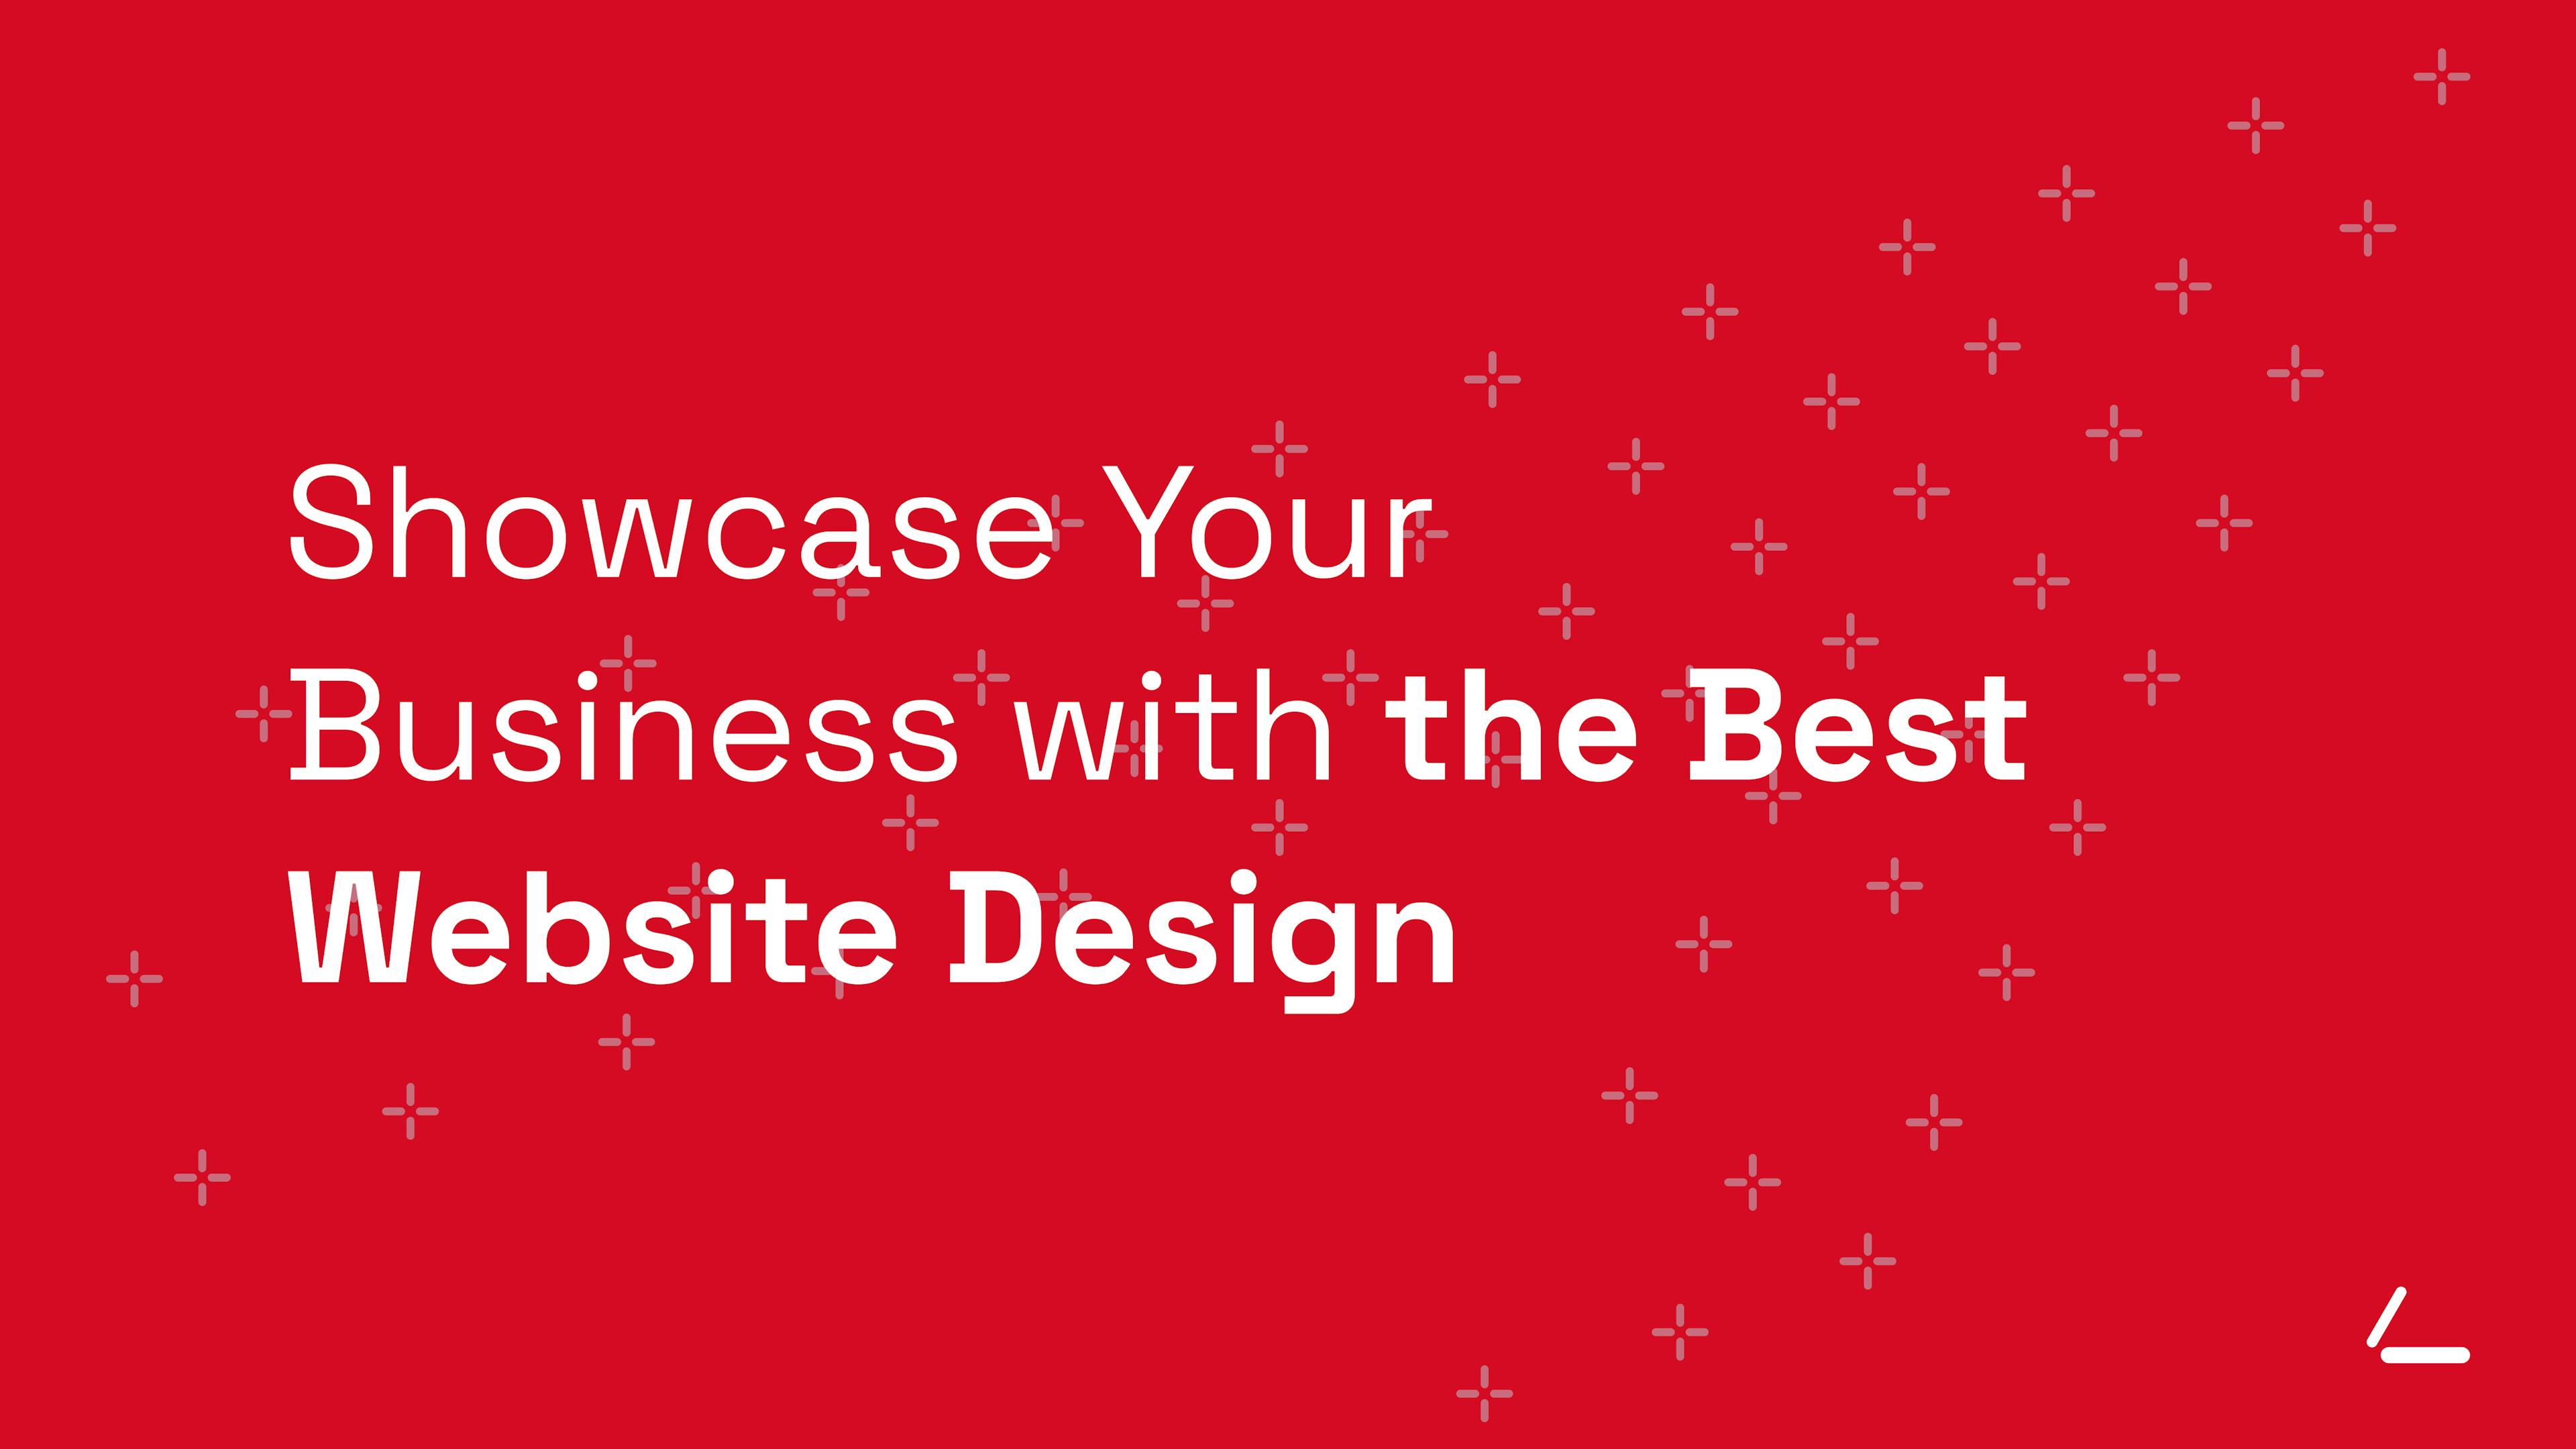 SEO Article Header - Red background with text about showcasing business with web design